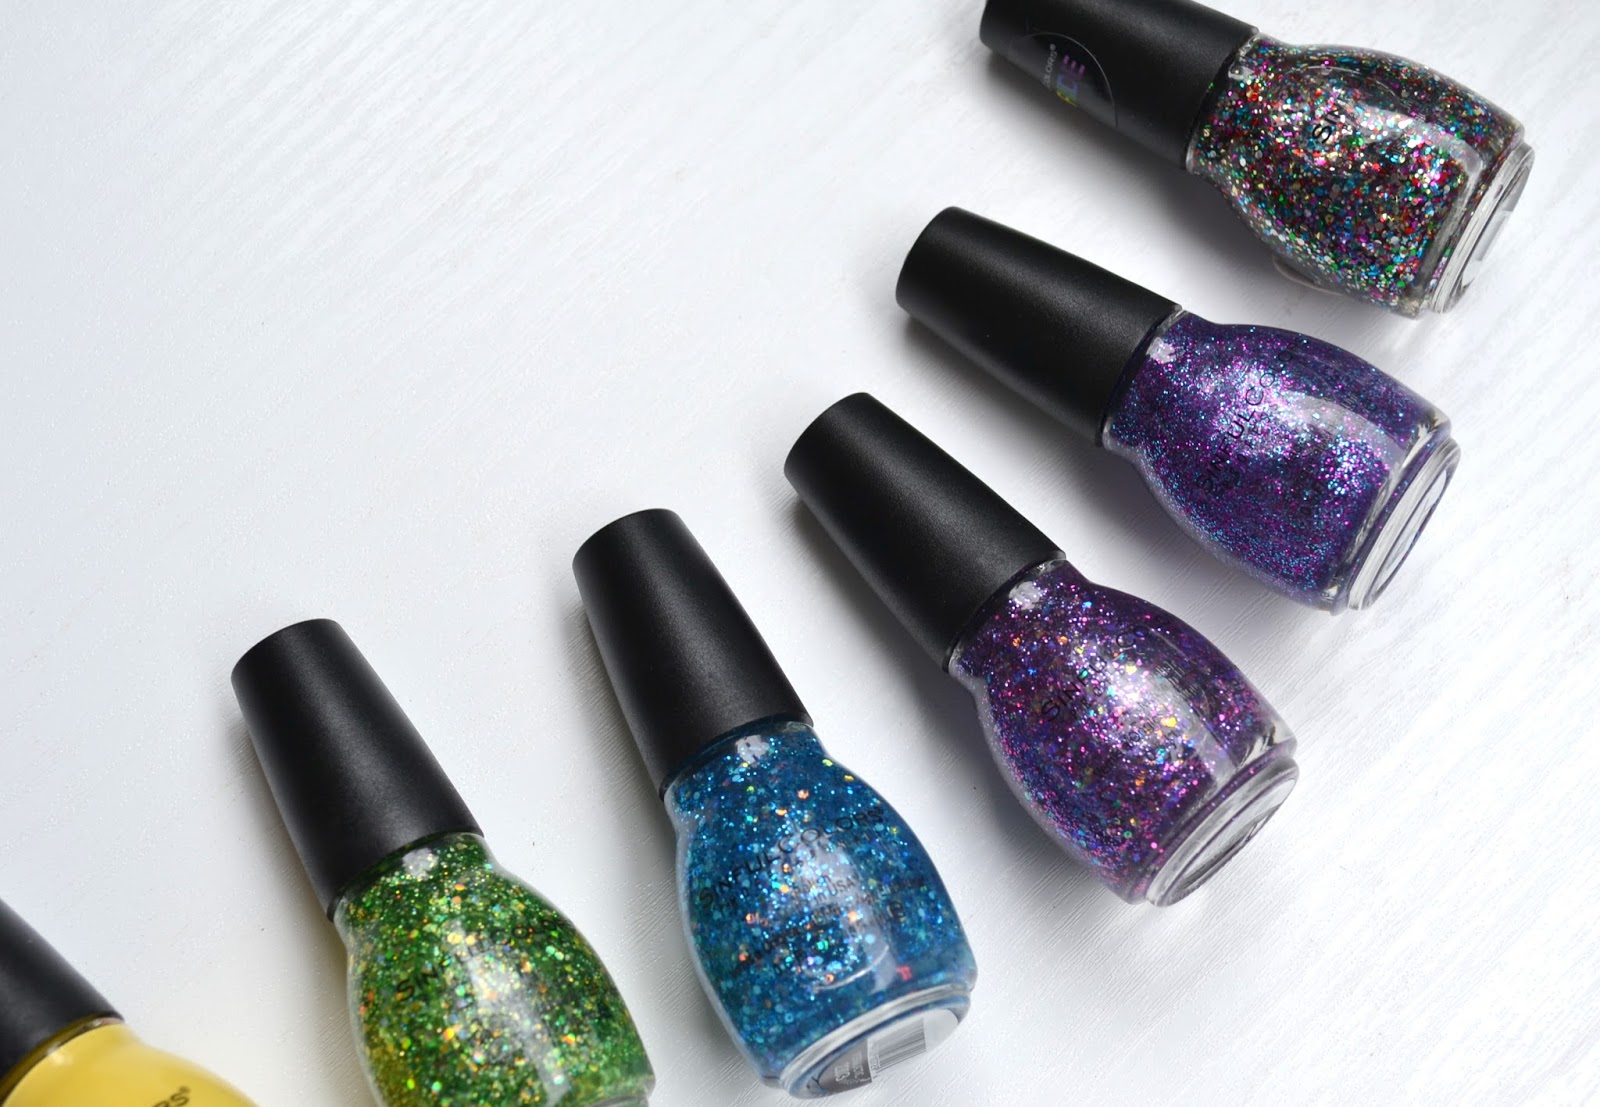 2. Sinful Colors Nail Polish Collection - wide 5